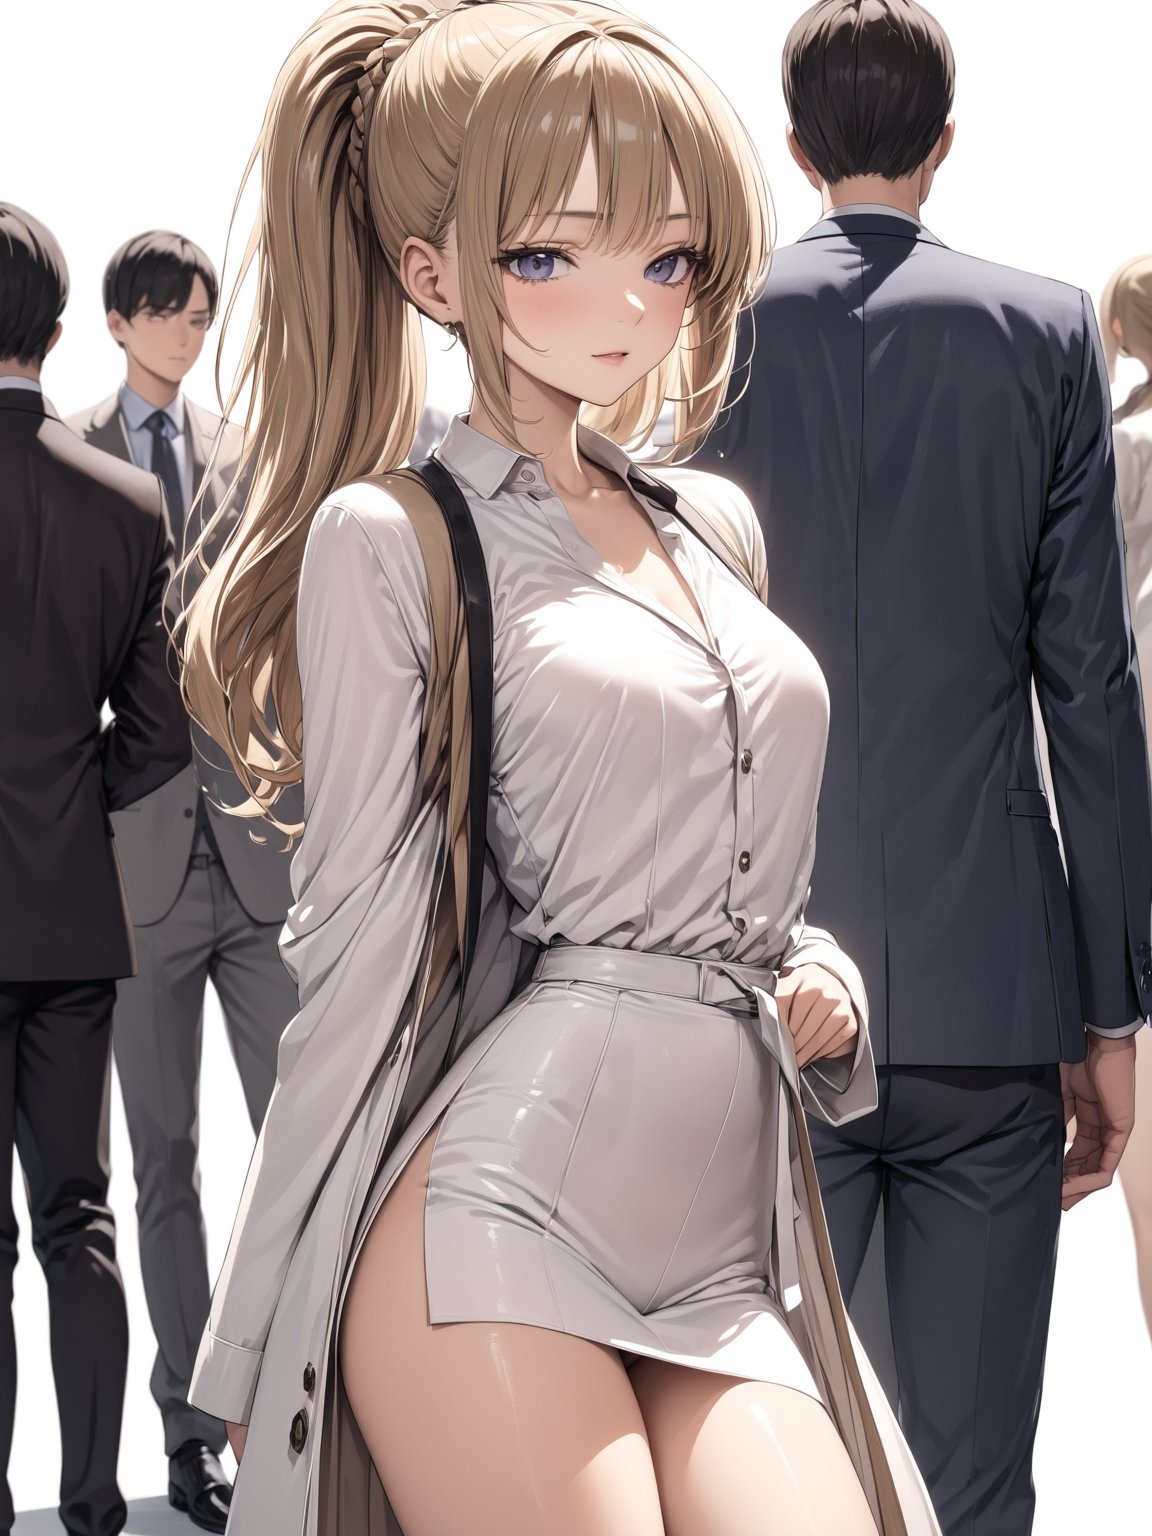 //Quality, masterpiece, best quality, detailmaster2, 8k, 8k UHD, ultra-high resolution, ultra-high definition, highres,
//Character, 1girl, solo, ,
//Fashion,
//Background, white_background,
//Others, ,KaruizawaKei